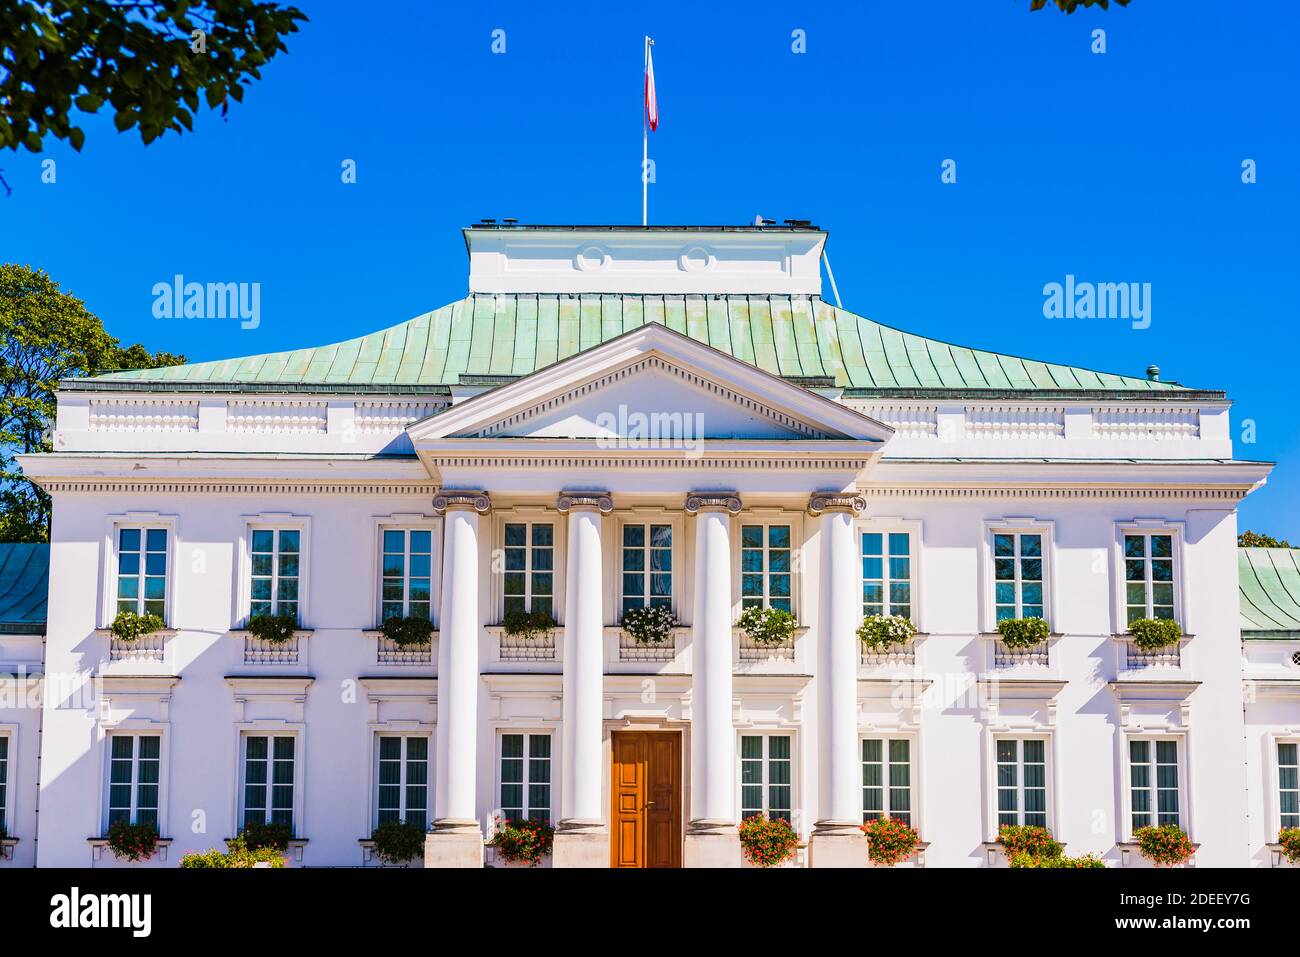 Belweder is a palace in Warsaw, near the Lazienki Park. It is one of the official residences used by Polish presidents. Warsaw, Poland, Europe Stock Photo